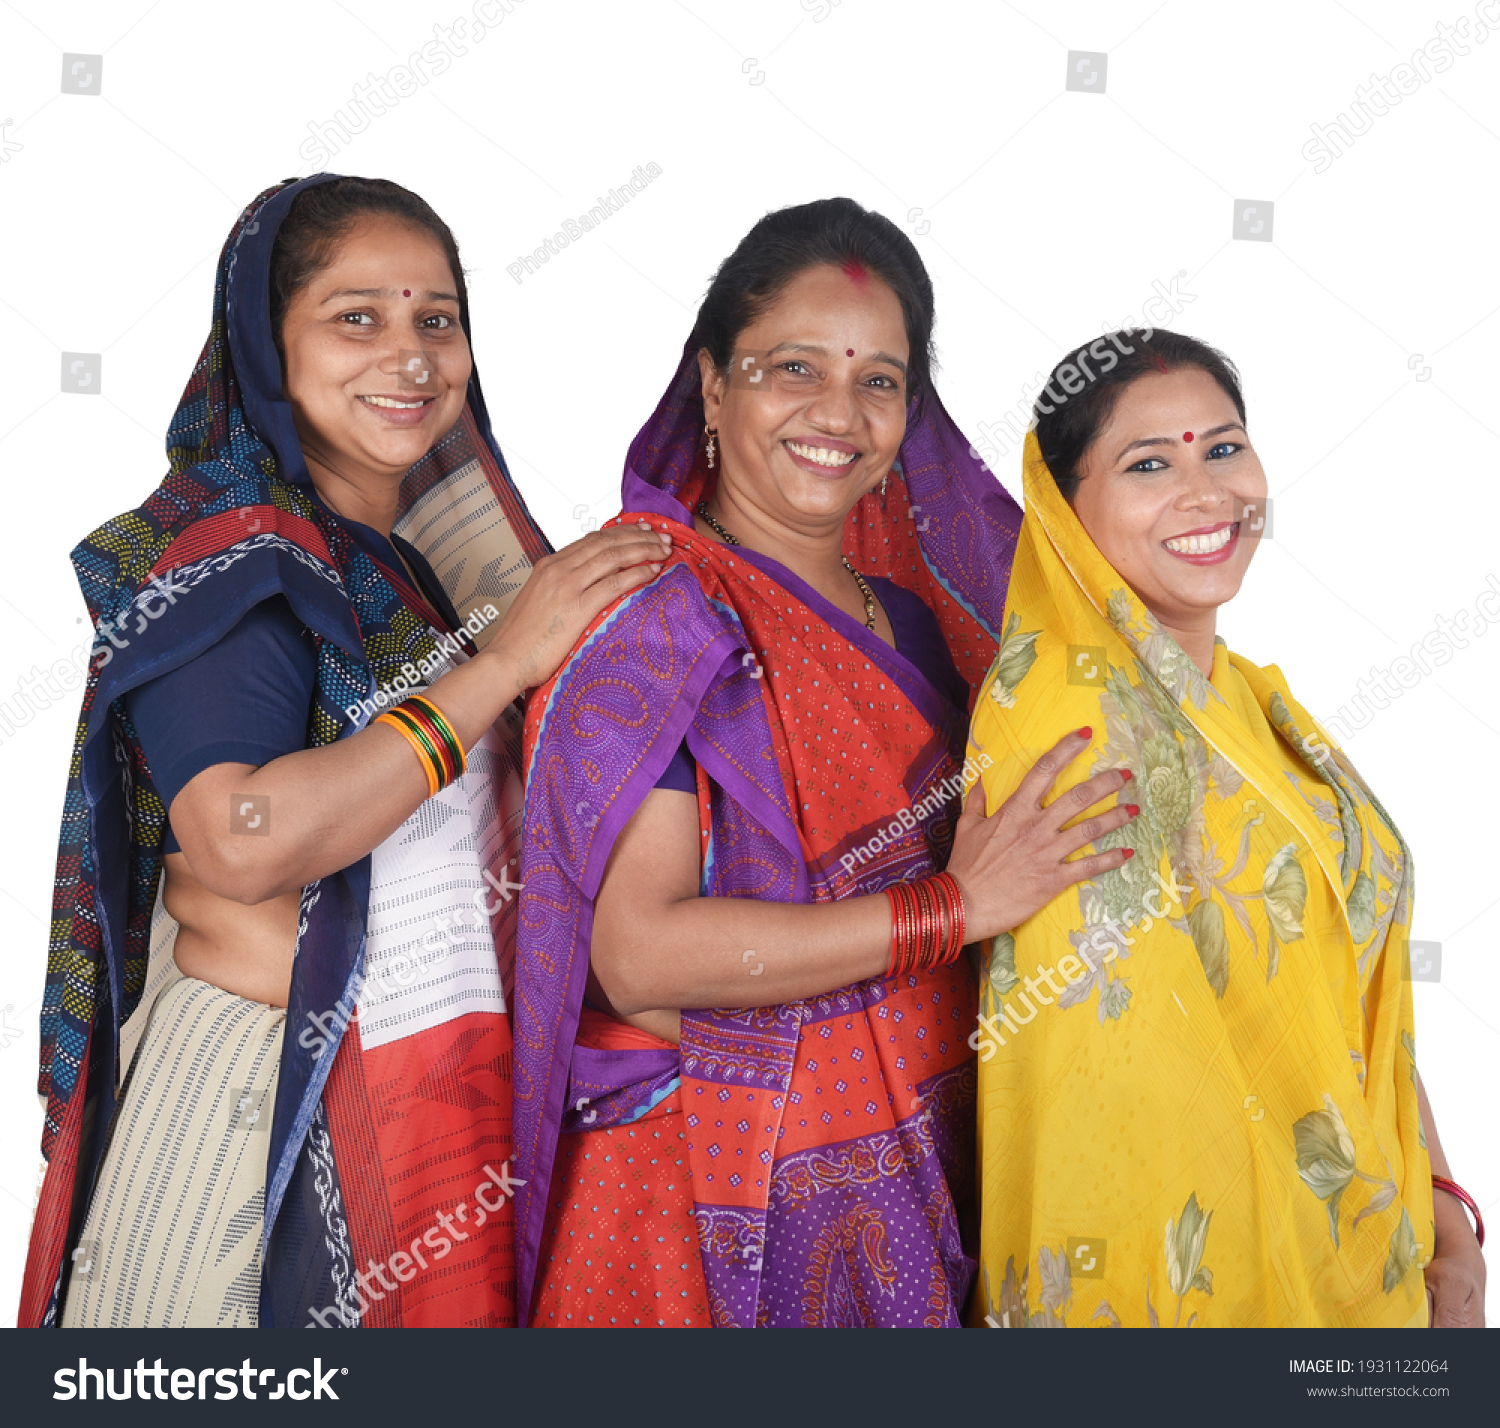 Three Rural Indian Women Posing Together Stock Photo Shutterstock